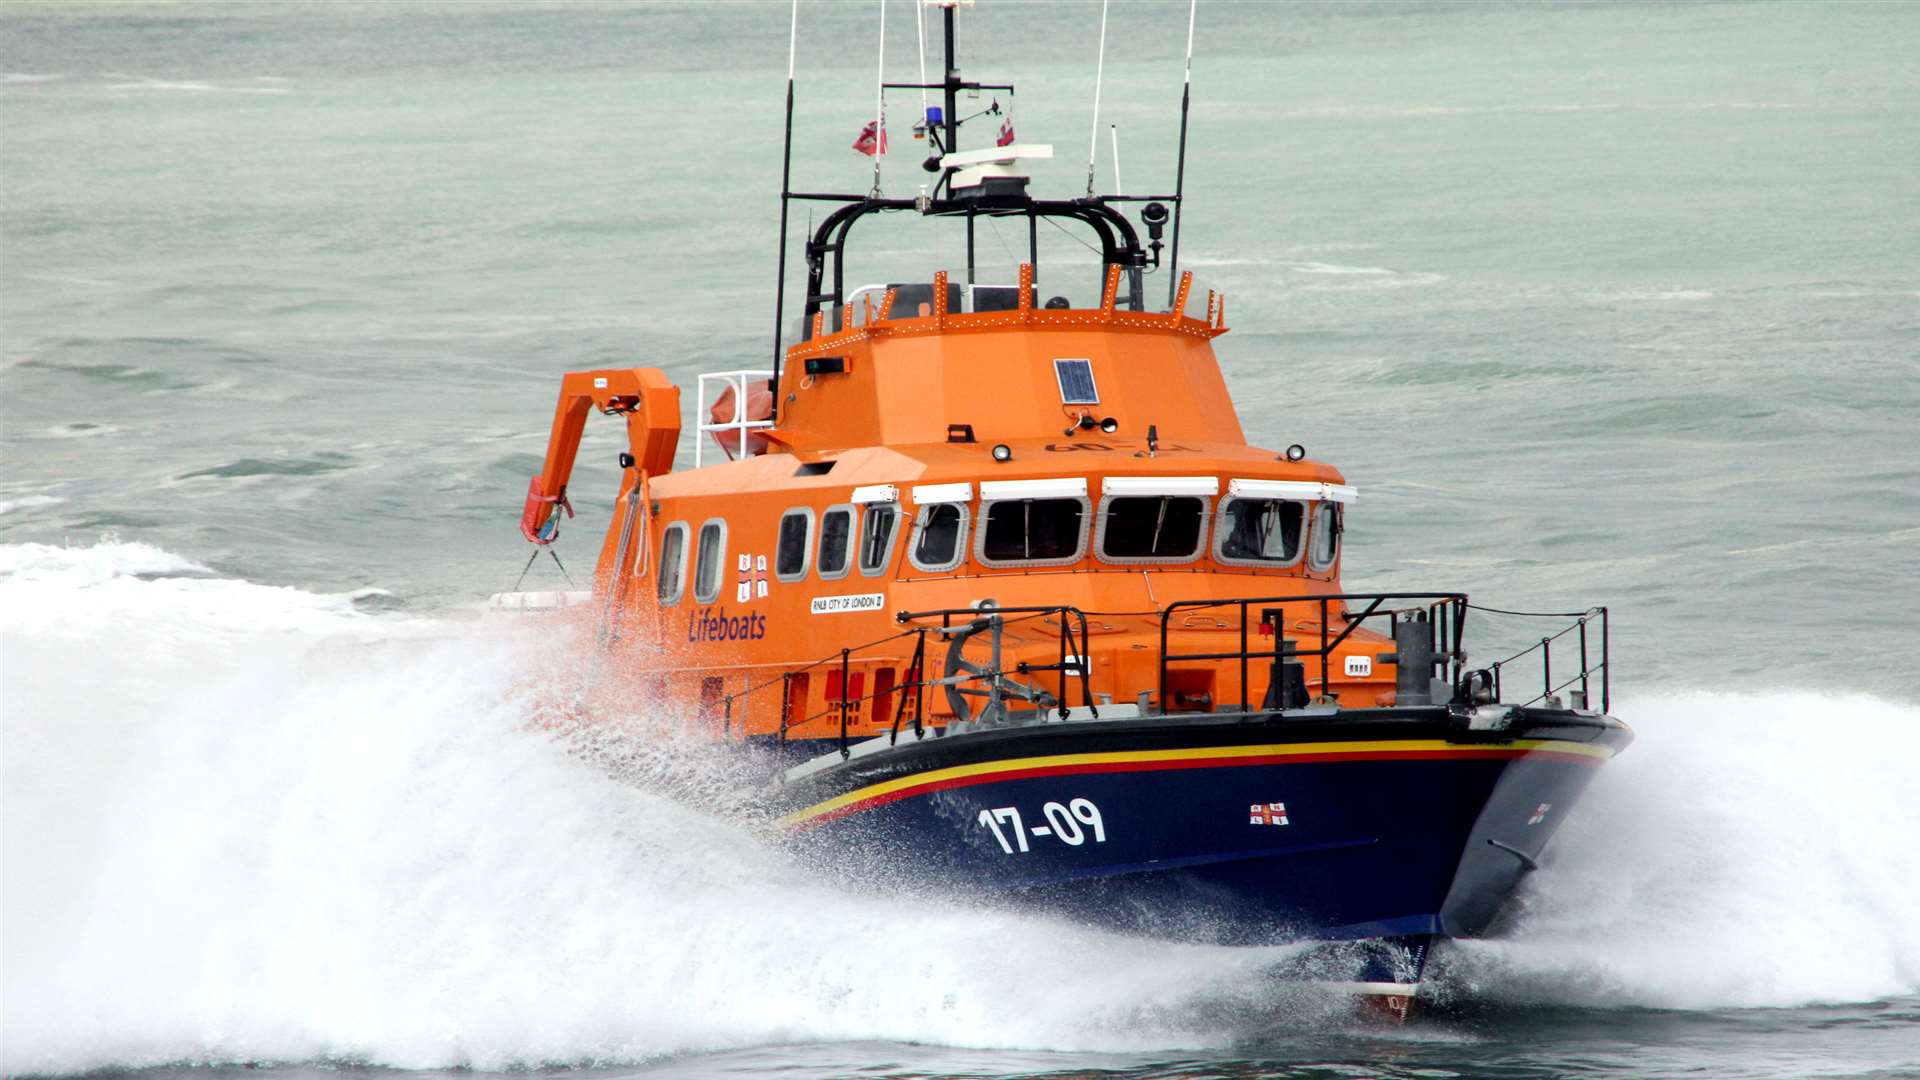 The Royal National Lifeboat Institution boat